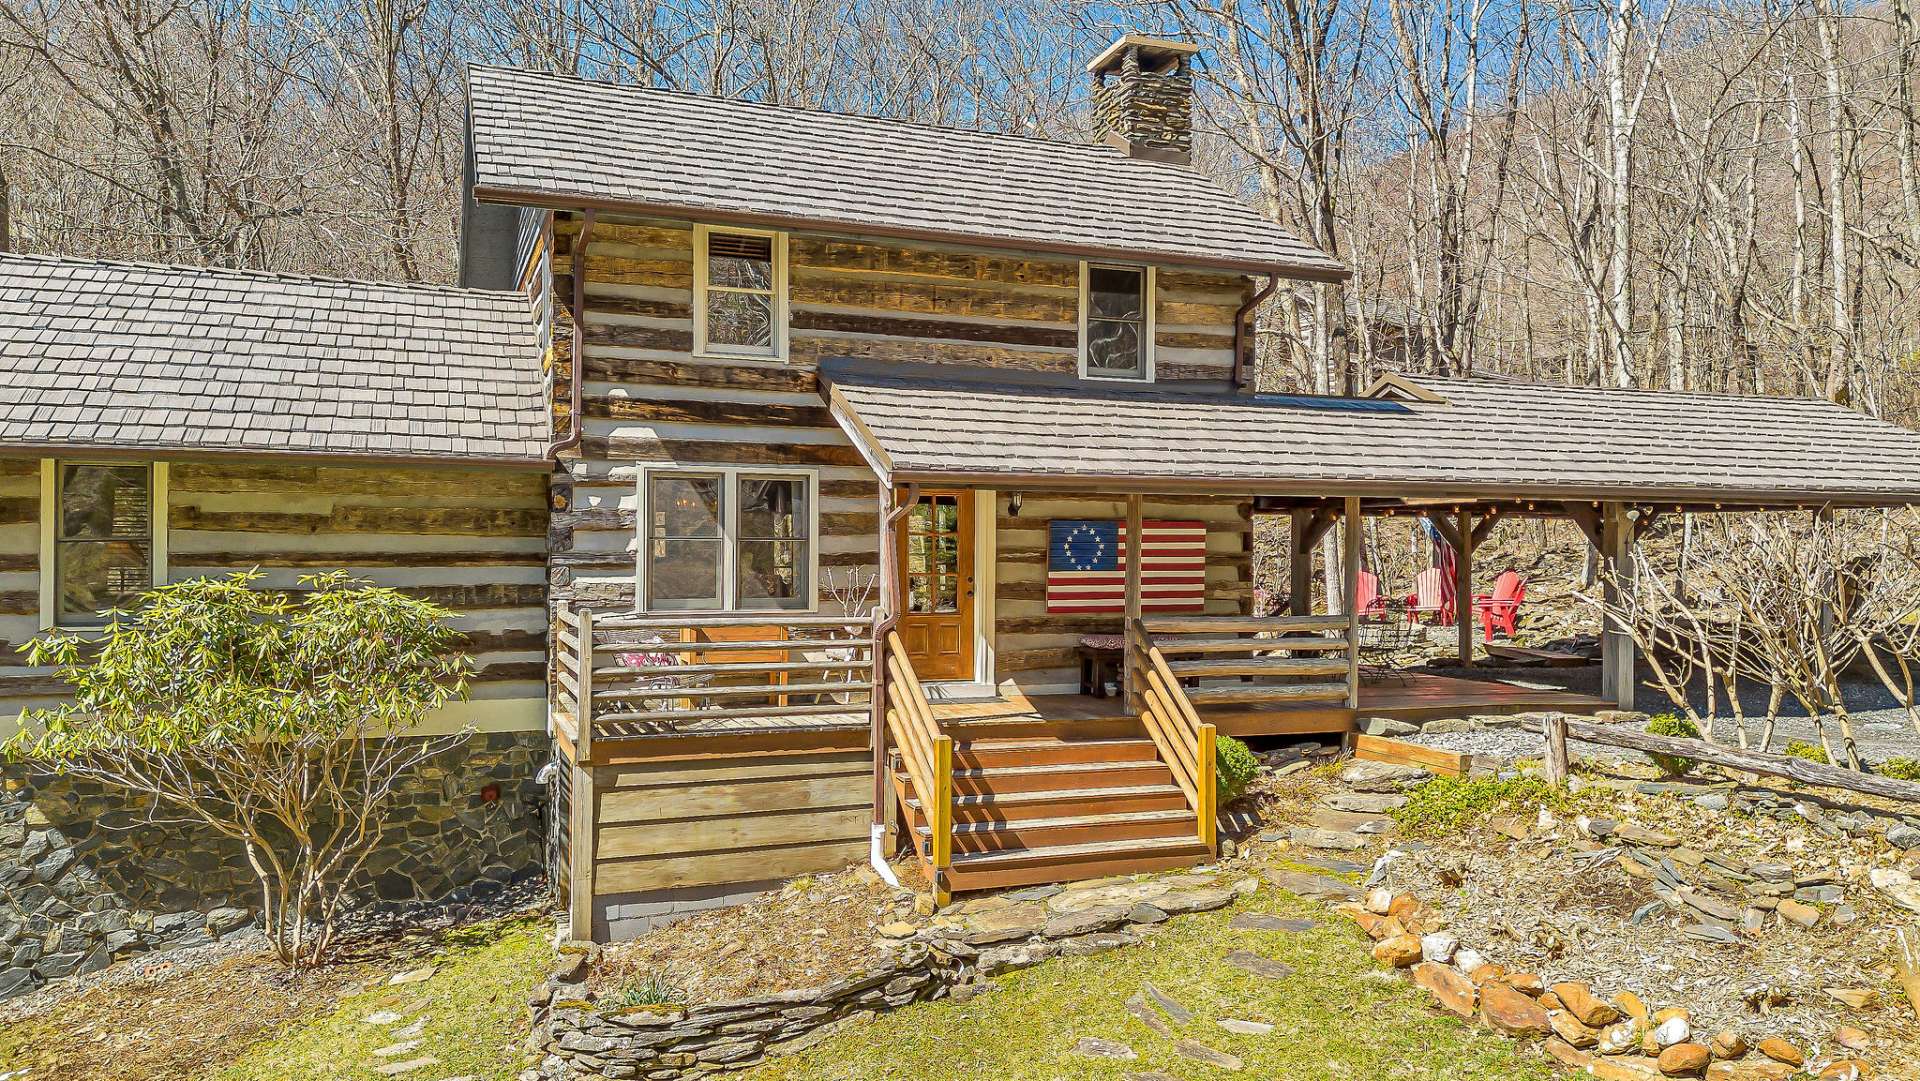 This cabin's inviting front porch is the epitome of warmth and welcome!